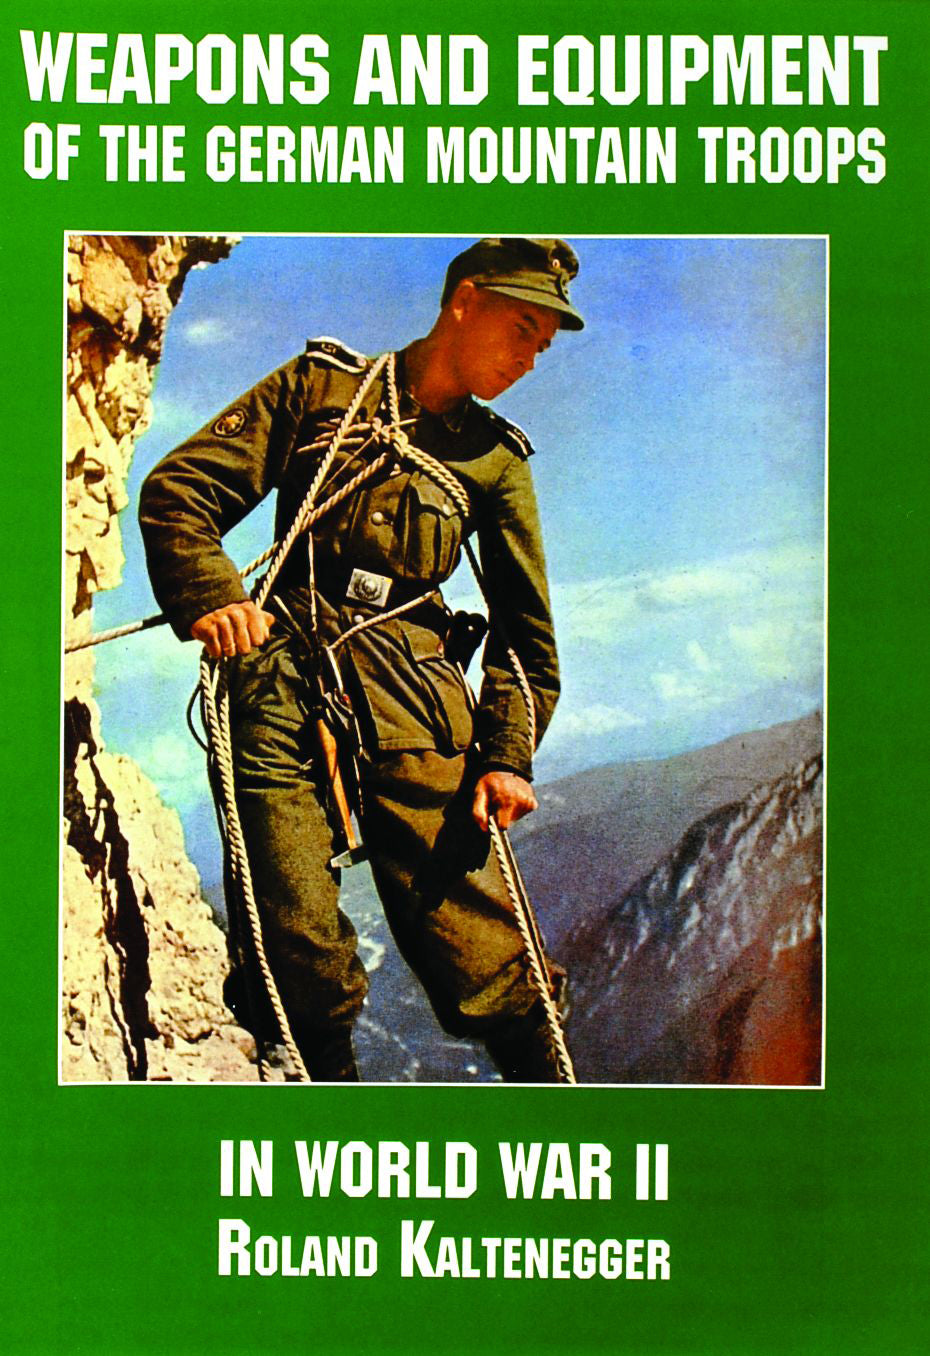 Weapons and Equipment of the German Mountain Troops in World War II